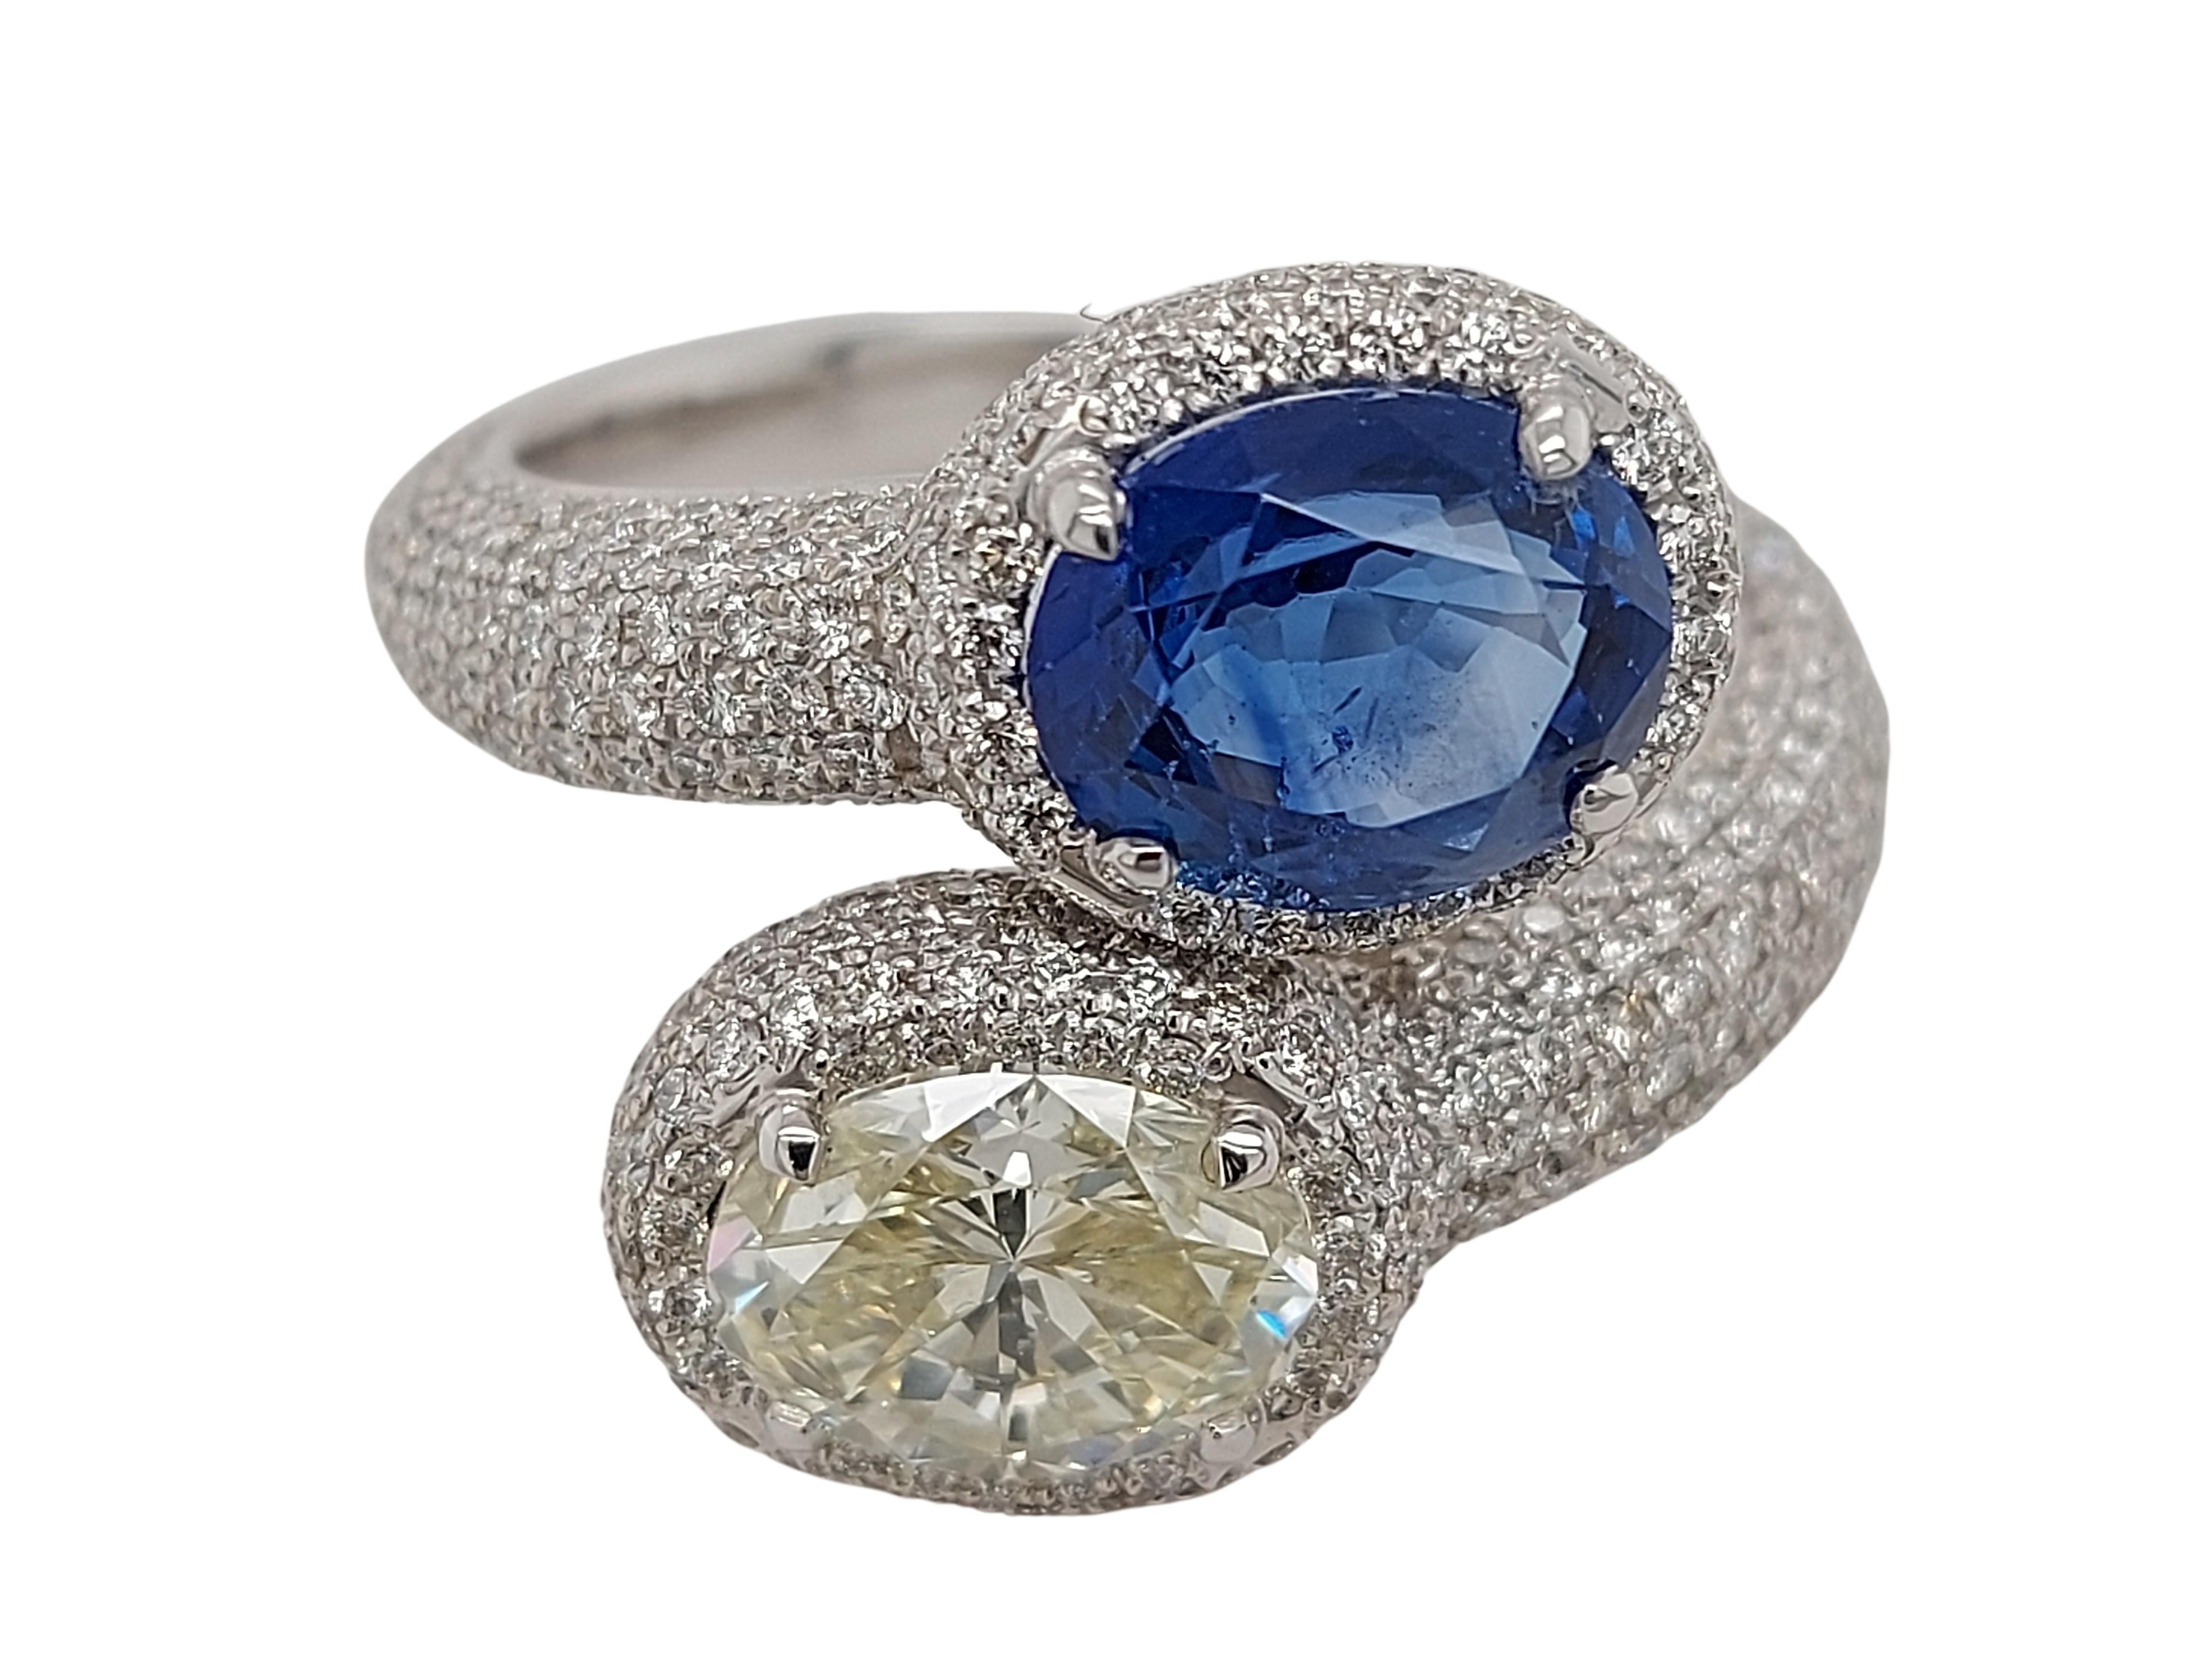 Stunning Toi et Moi 18kt White Gold Ring with a 2.63 Carat Sapphire, 1.67 Carat  For Sale 1